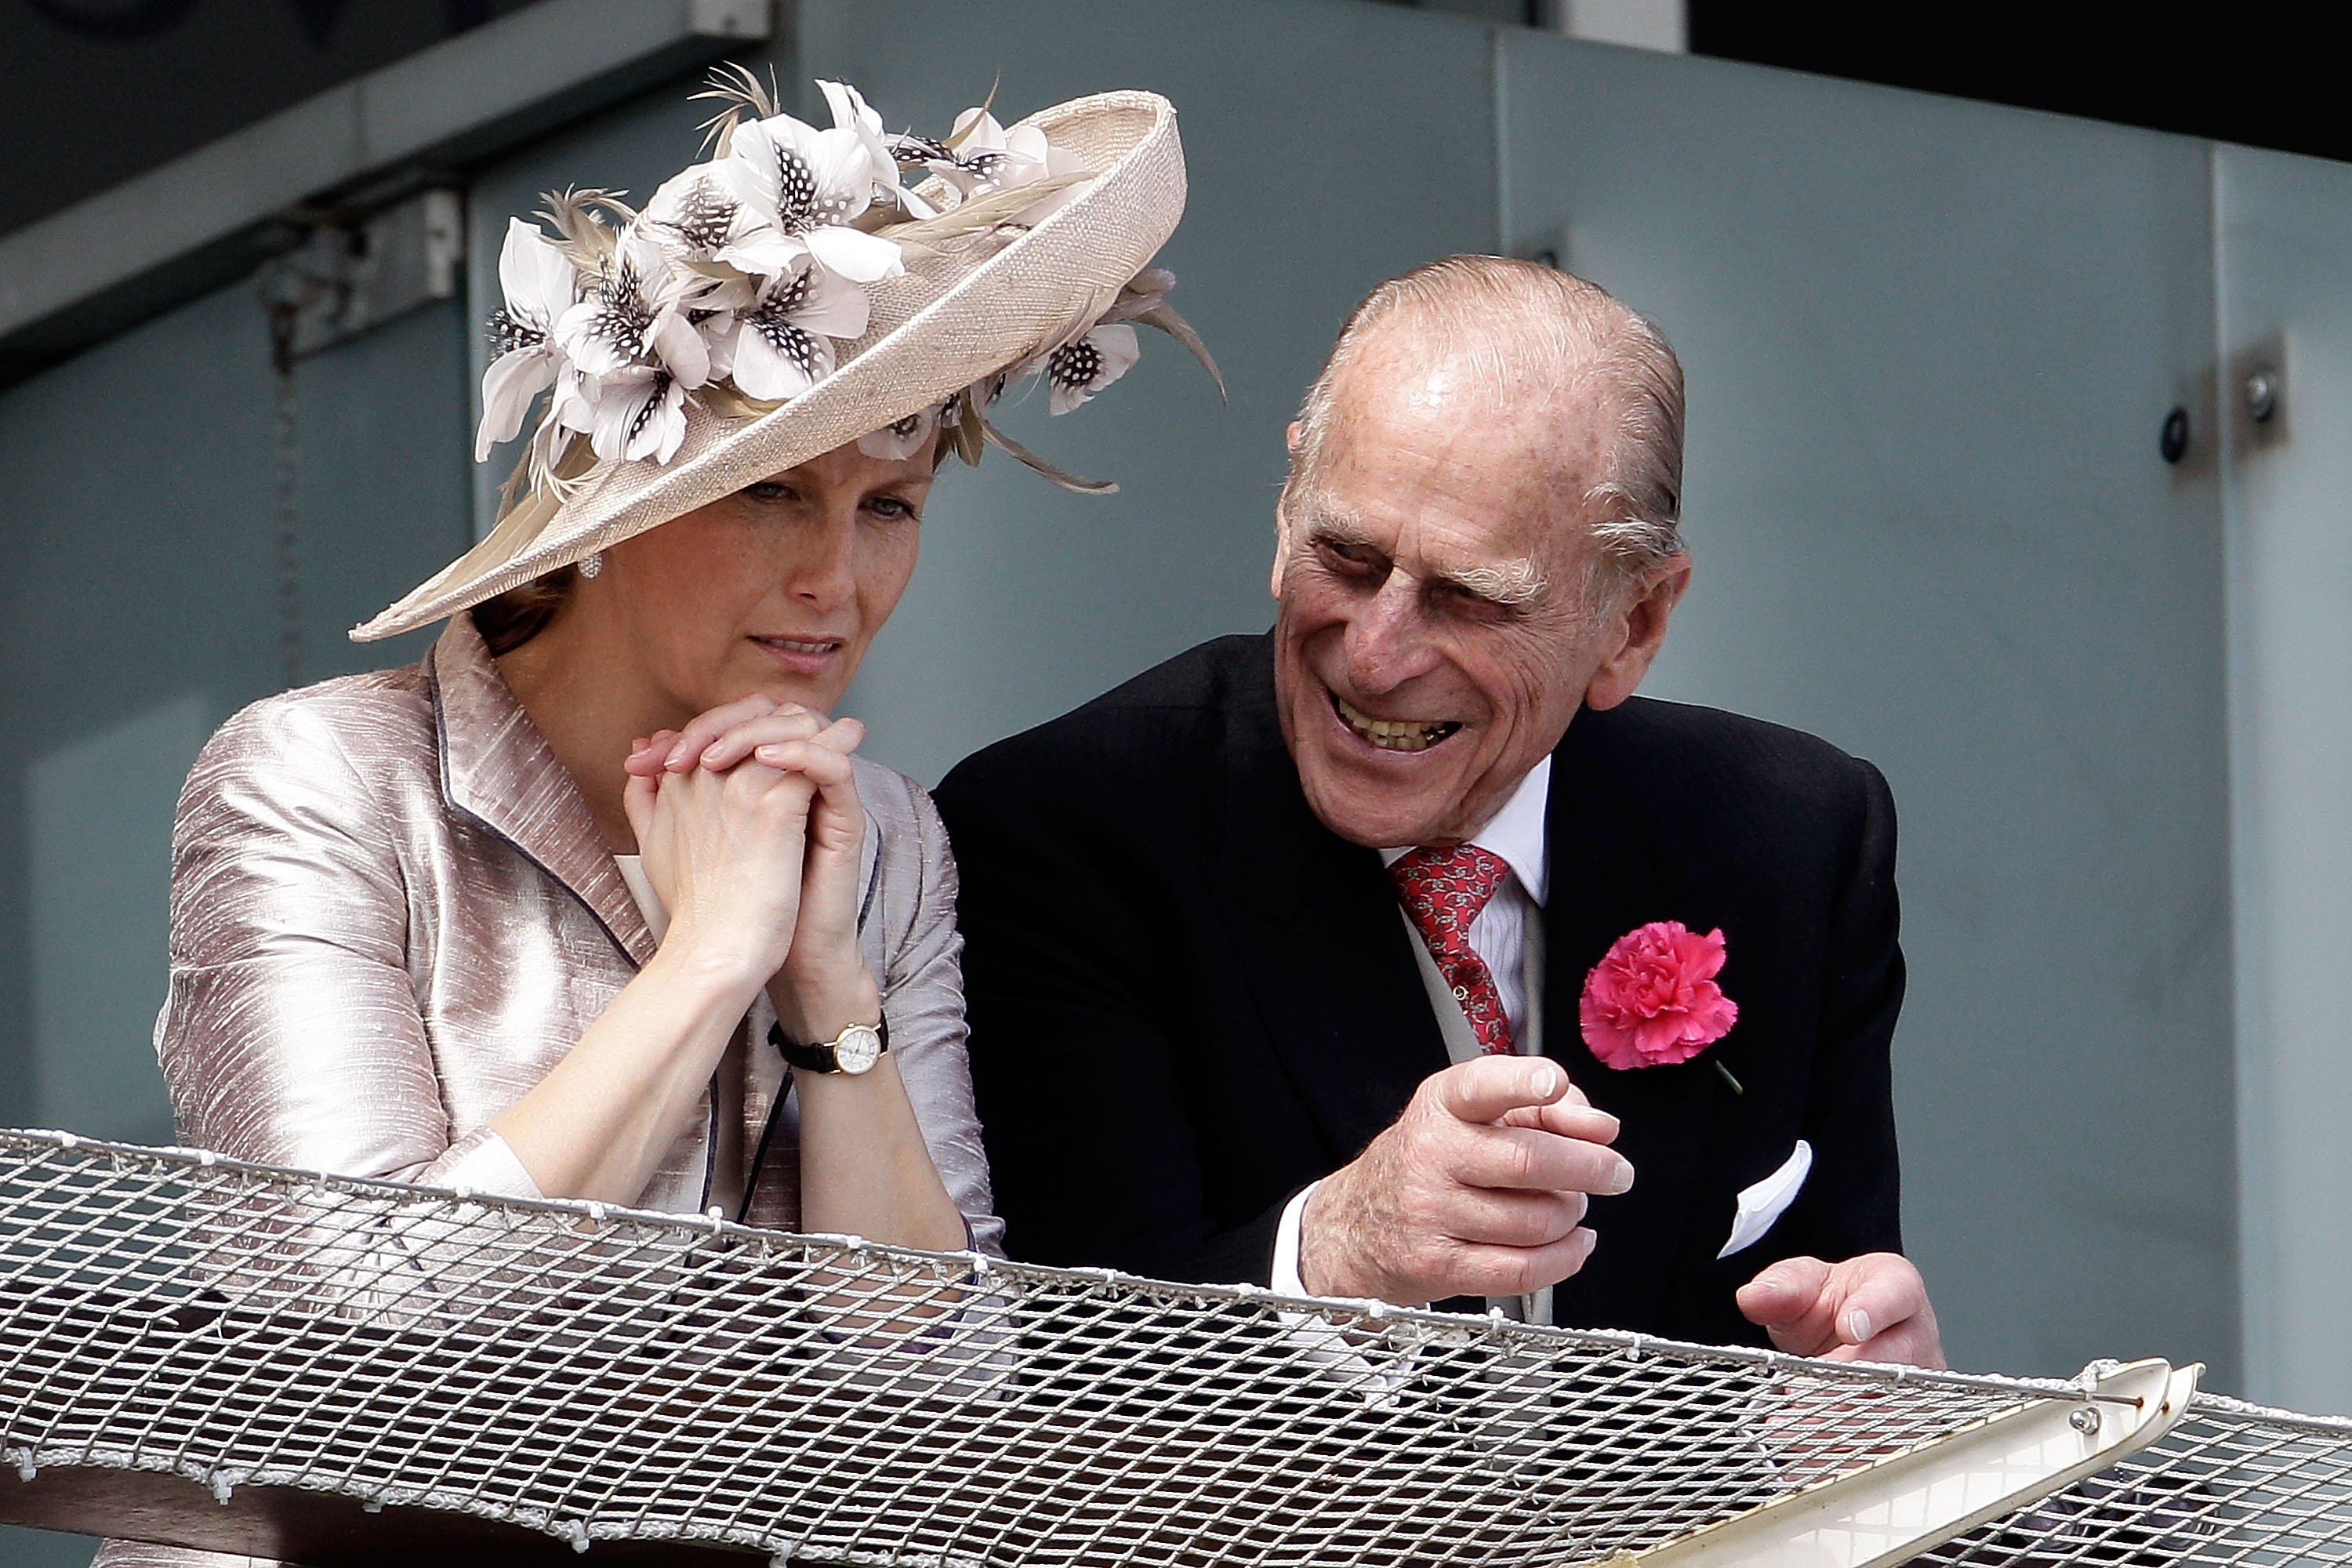 Prince Philip, Duke of Edinburgh and Sophie Rhys-Jones, Countess of Wessex wait for the start of the Epsom Derby at Epsom Downs racecourse on June 4, 2011 in Epsom, England | Source: Getty Images 